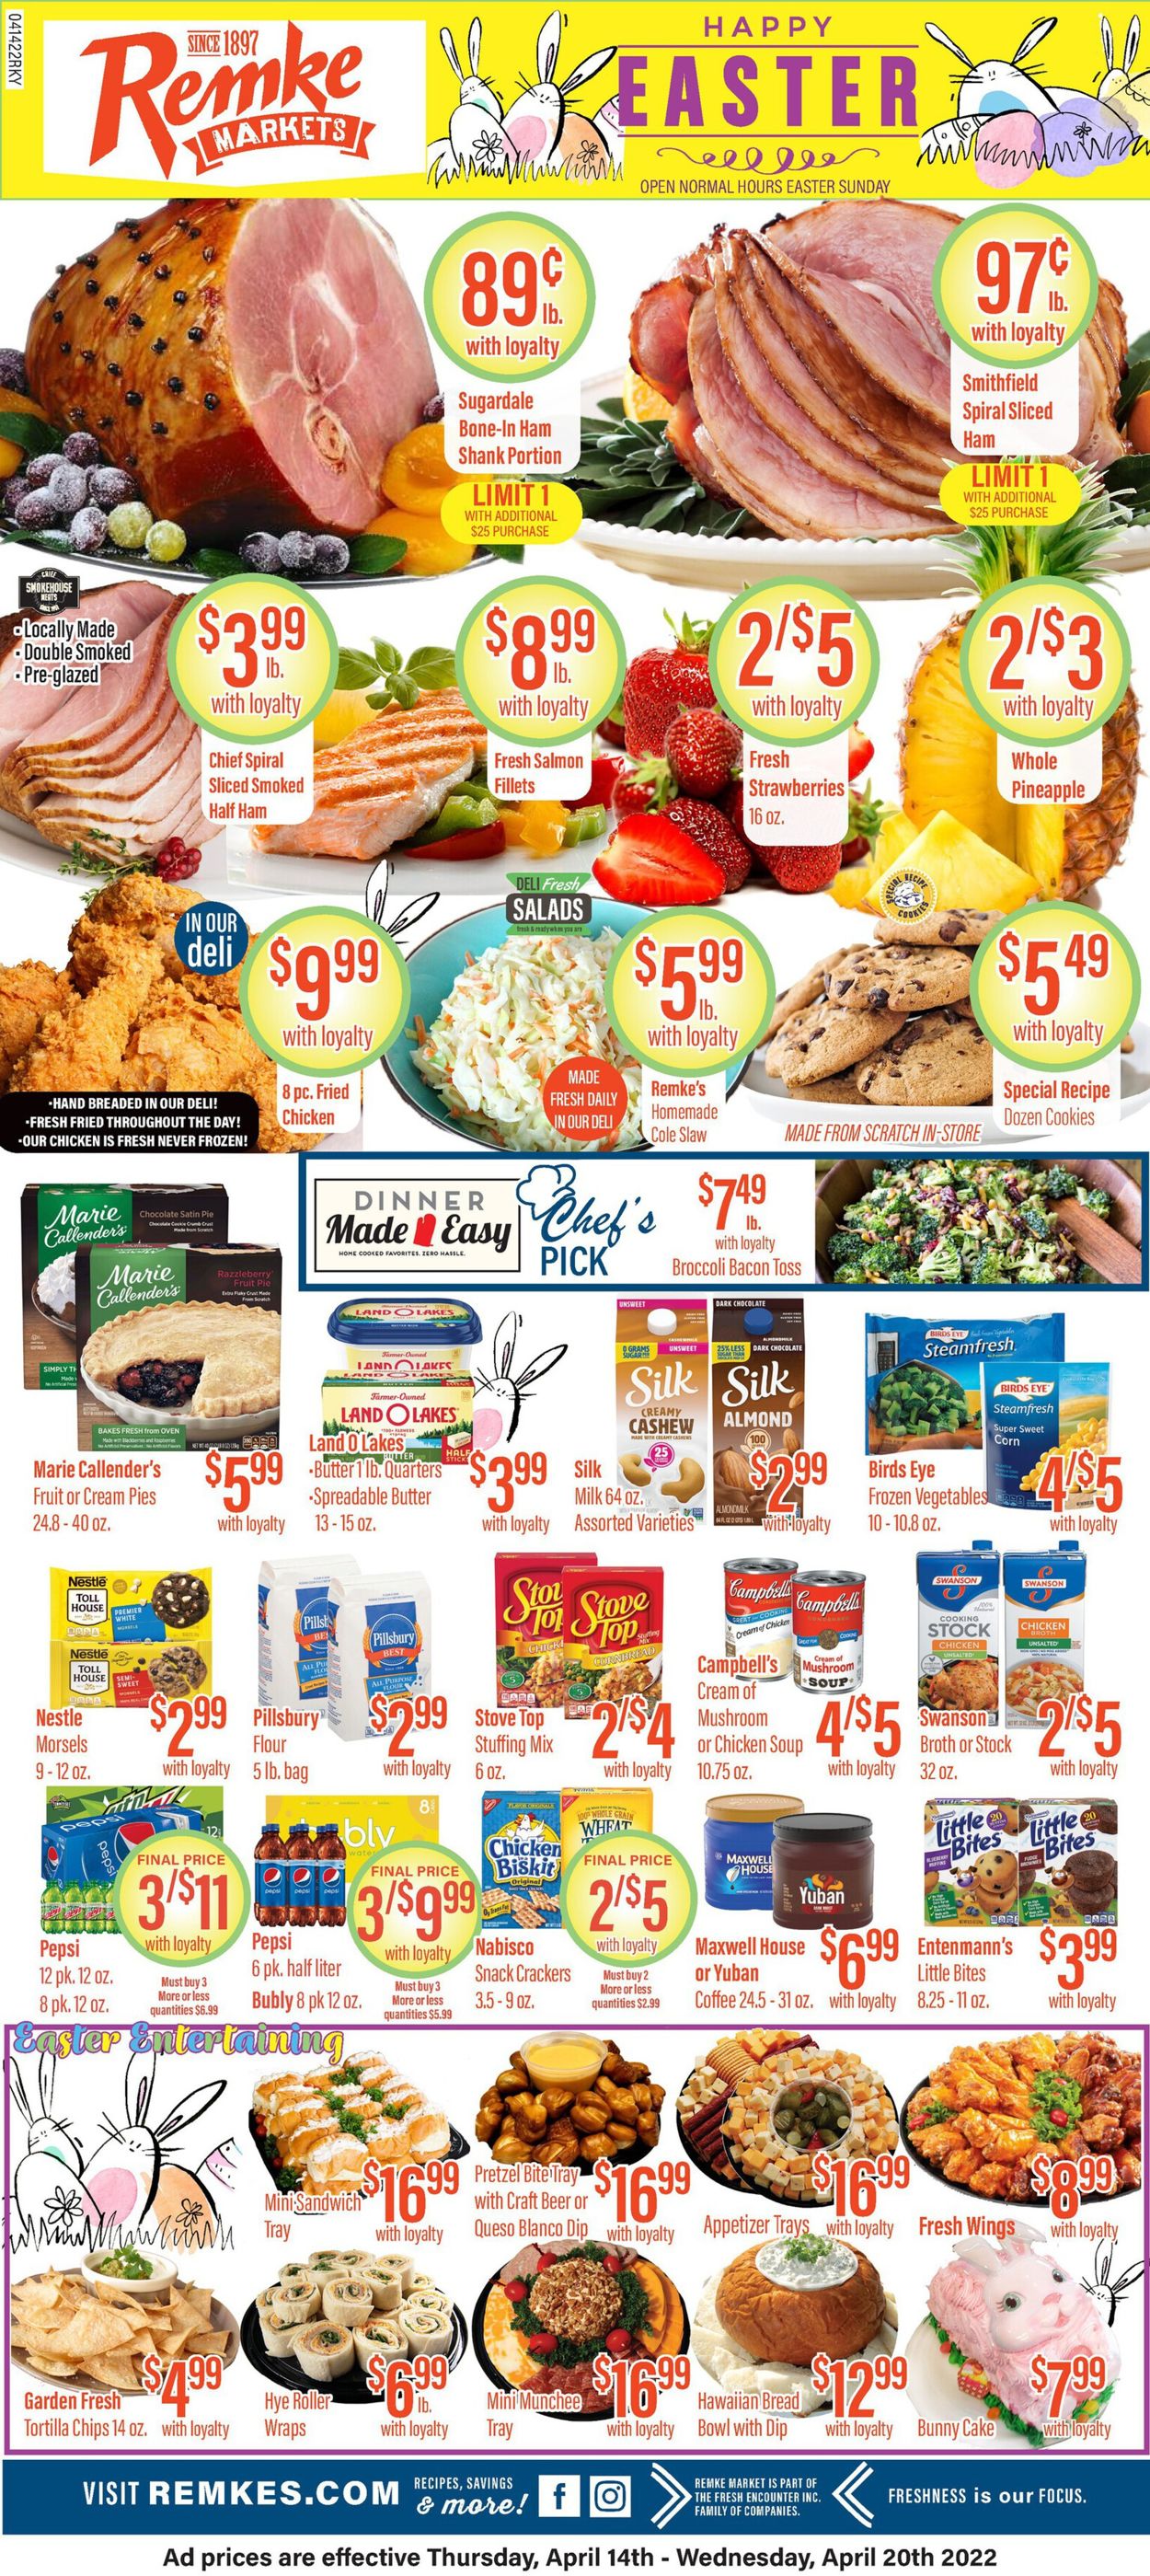 Remke Markets EASTER AD 2022 Weekly Ad Circular - valid 04/14-04/20/2022 (Page 2)